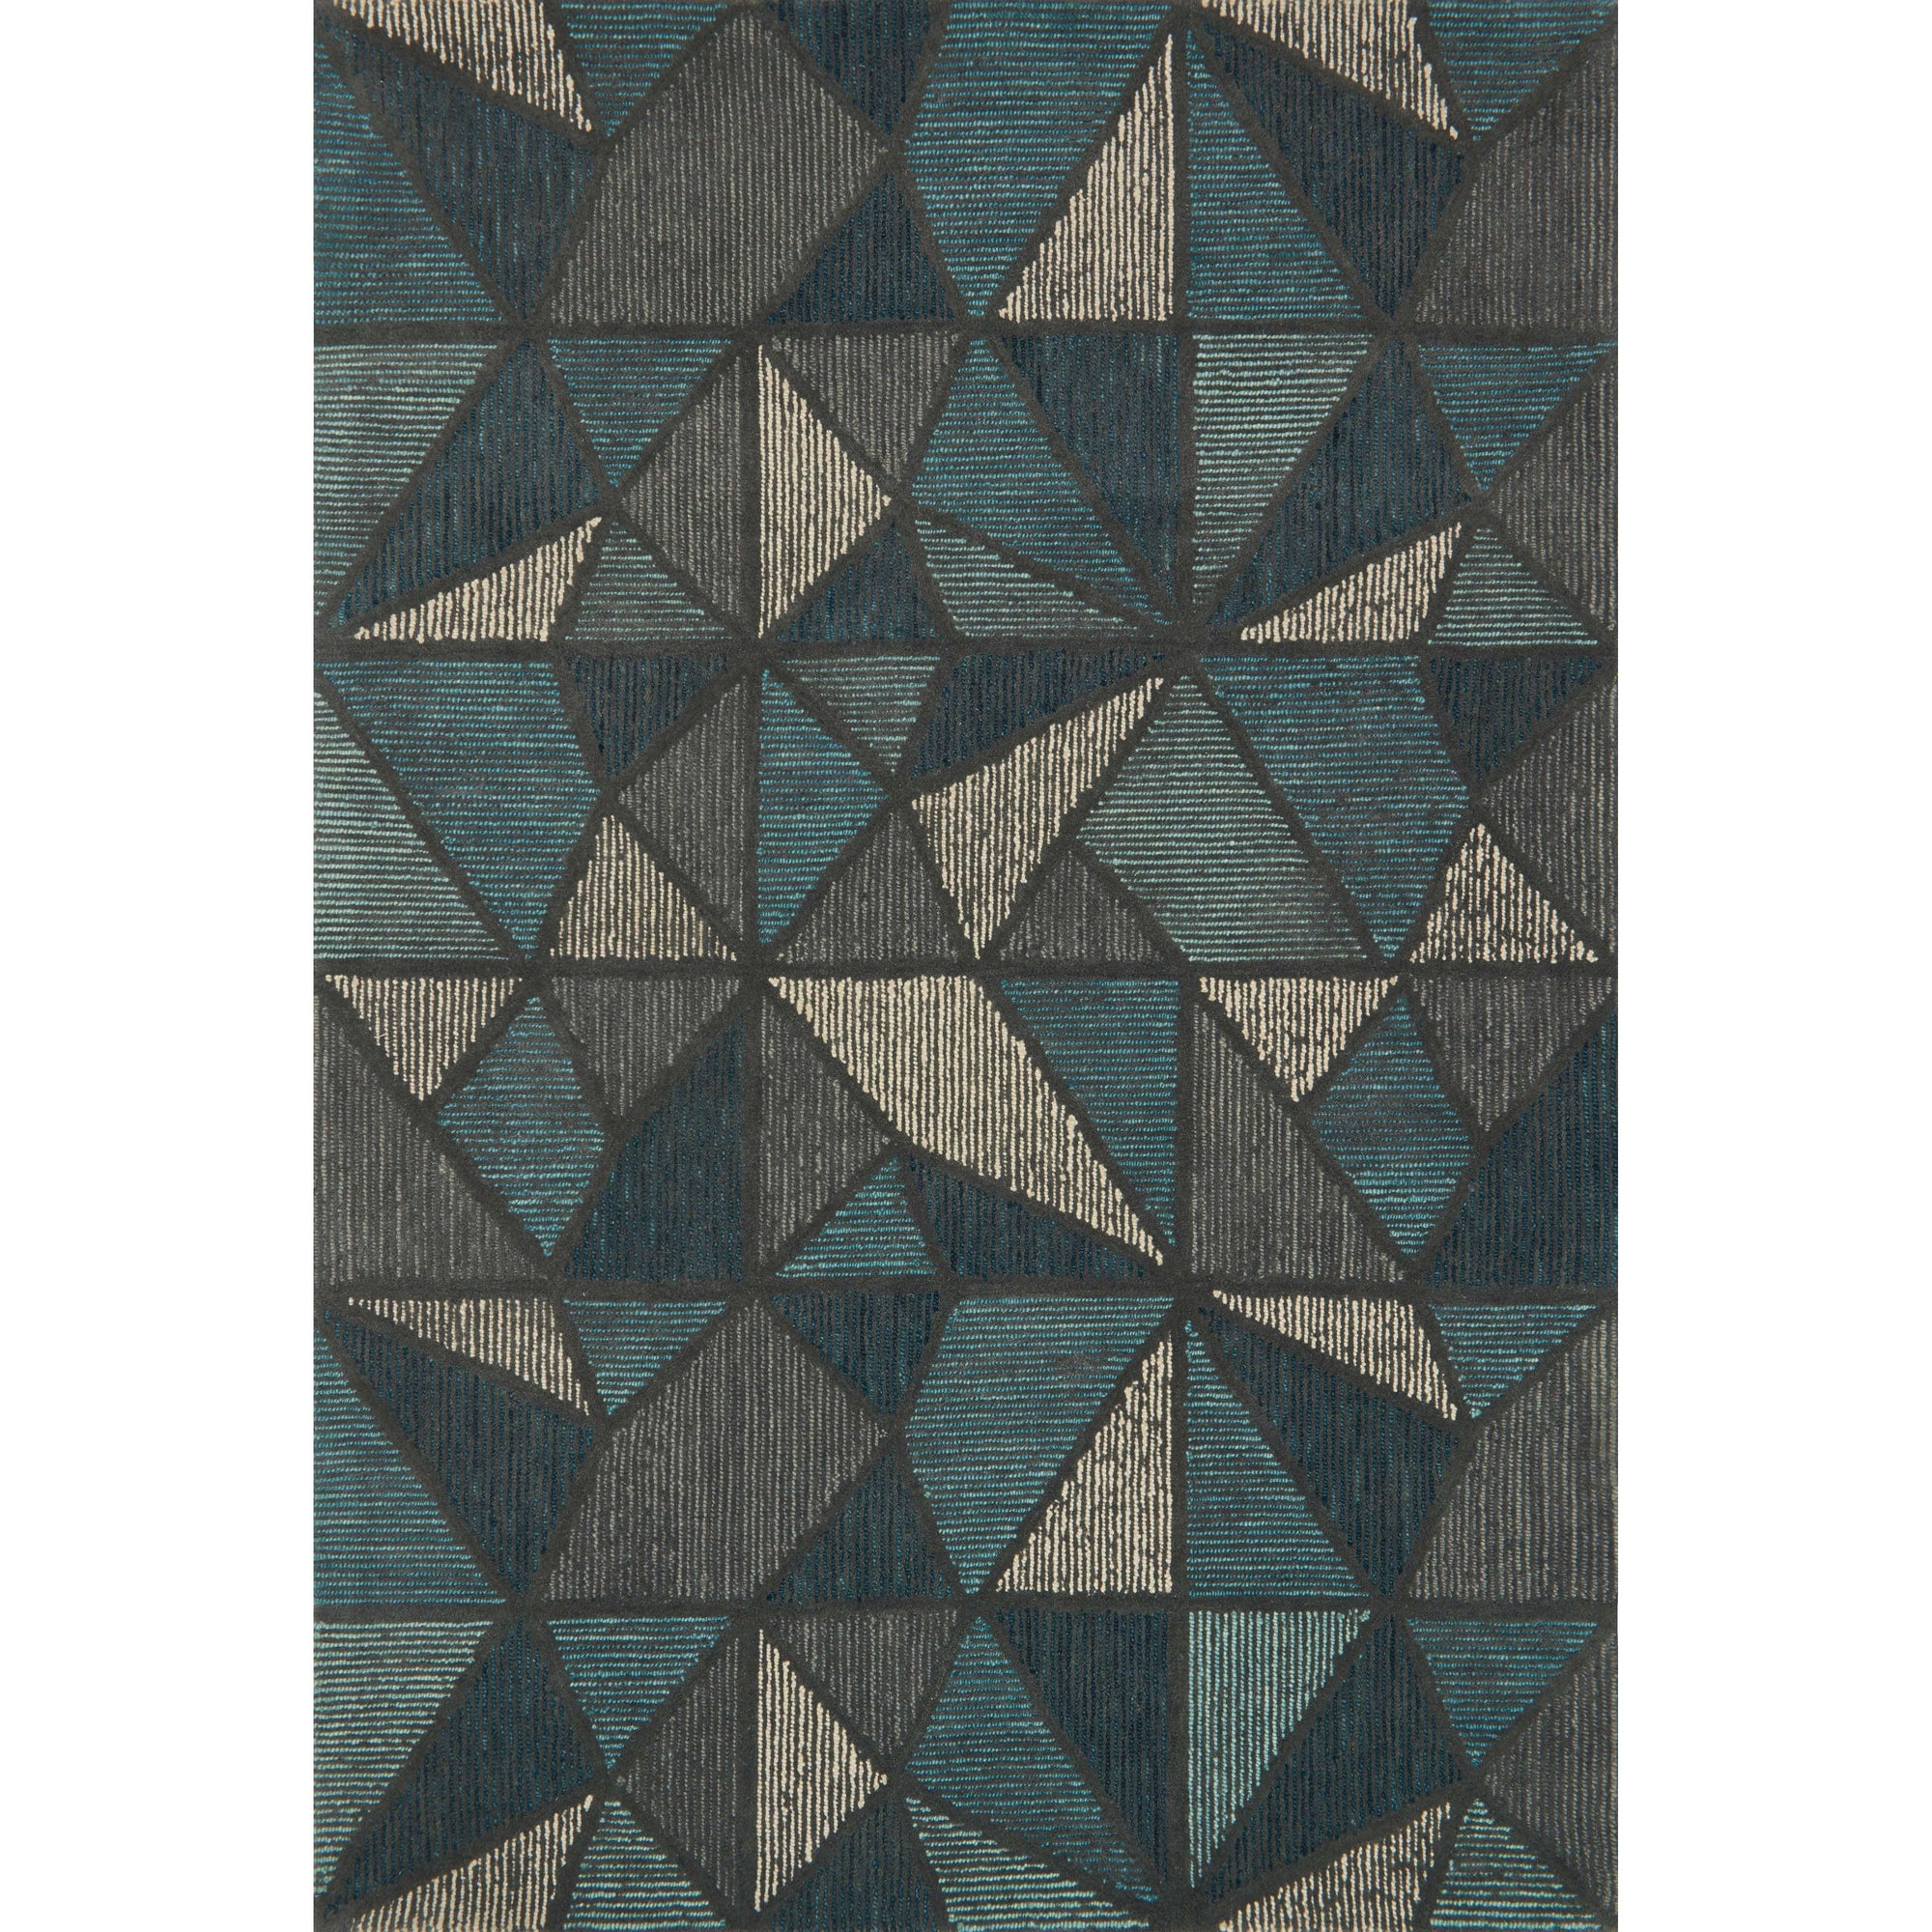 Rugs by Roo Loloi Gemology Teal Grey Area Rug in size 18" x 18" Sample